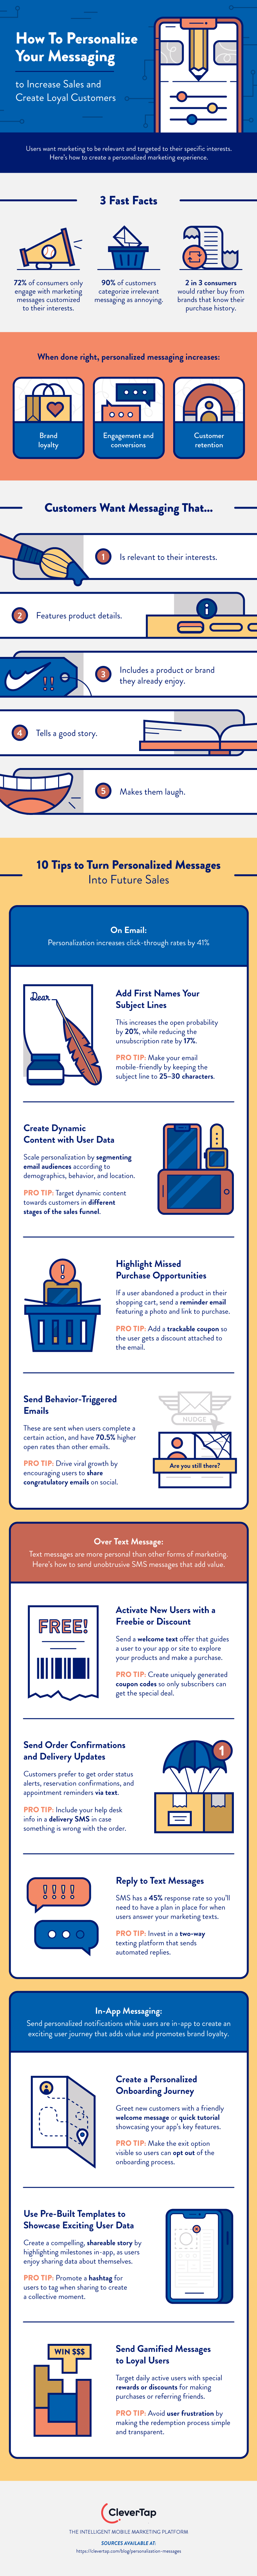 Infographic for Personalization Messages